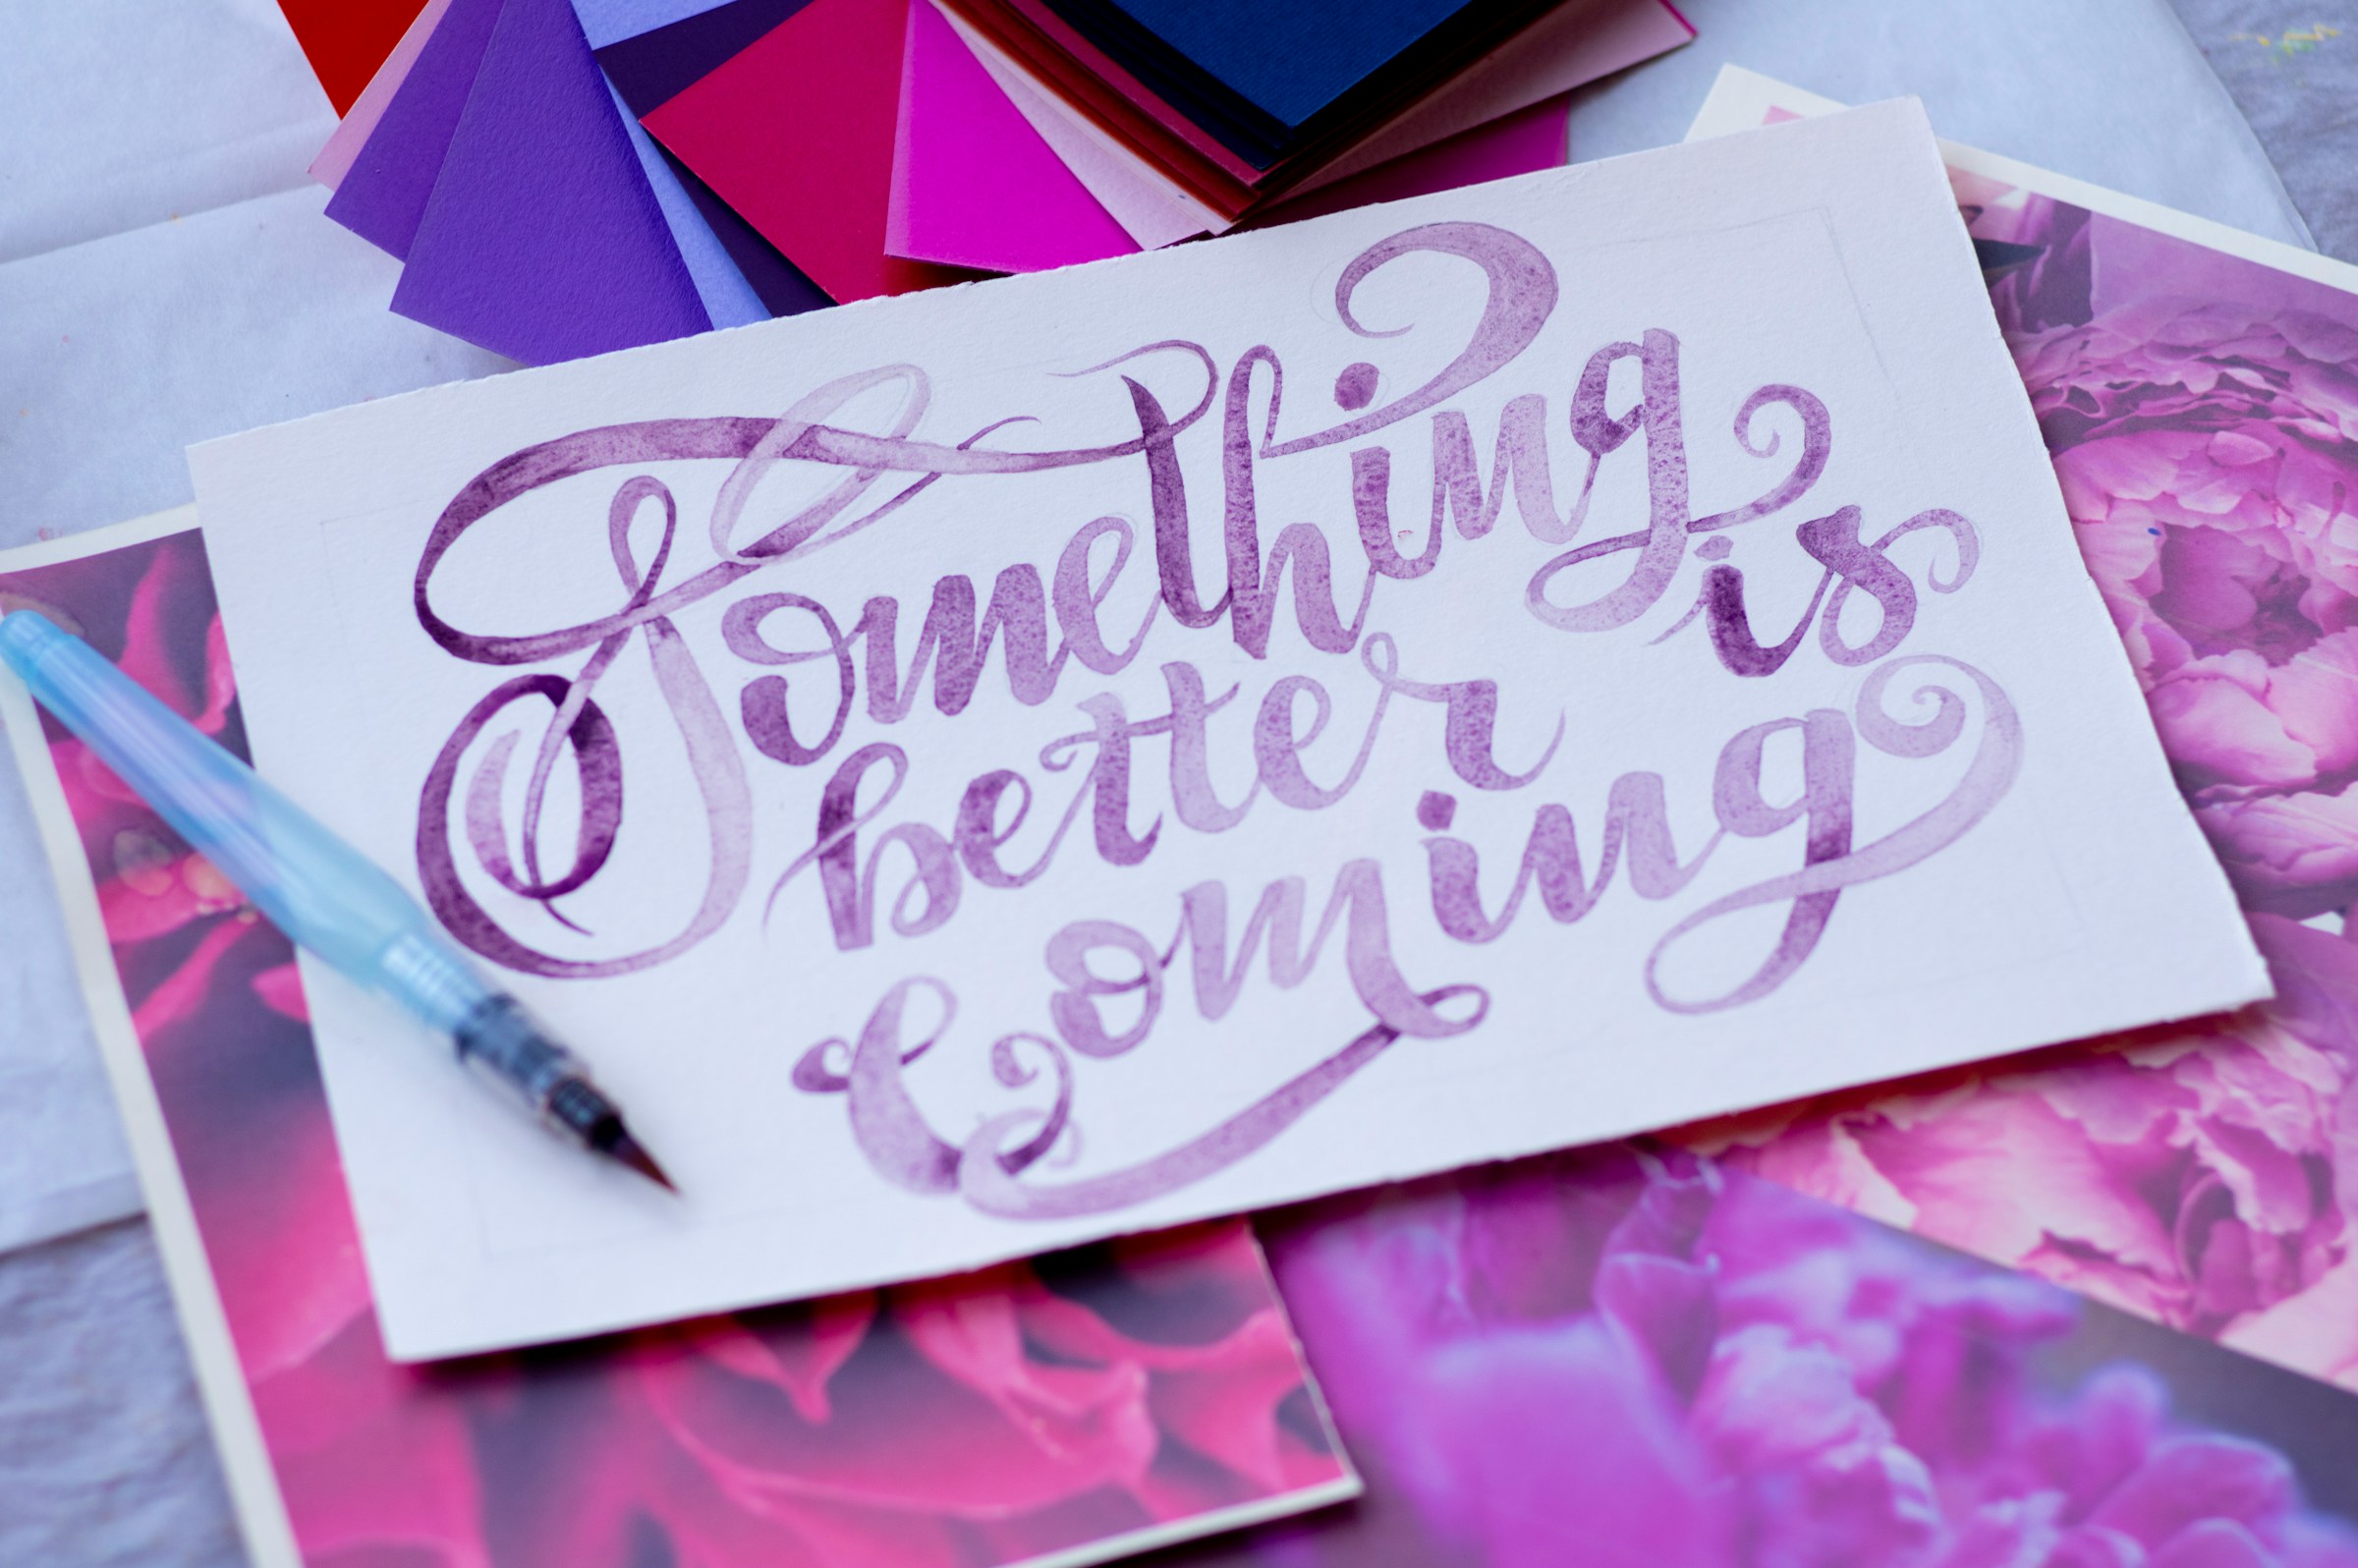 something better is coming, an affirmation written on a note